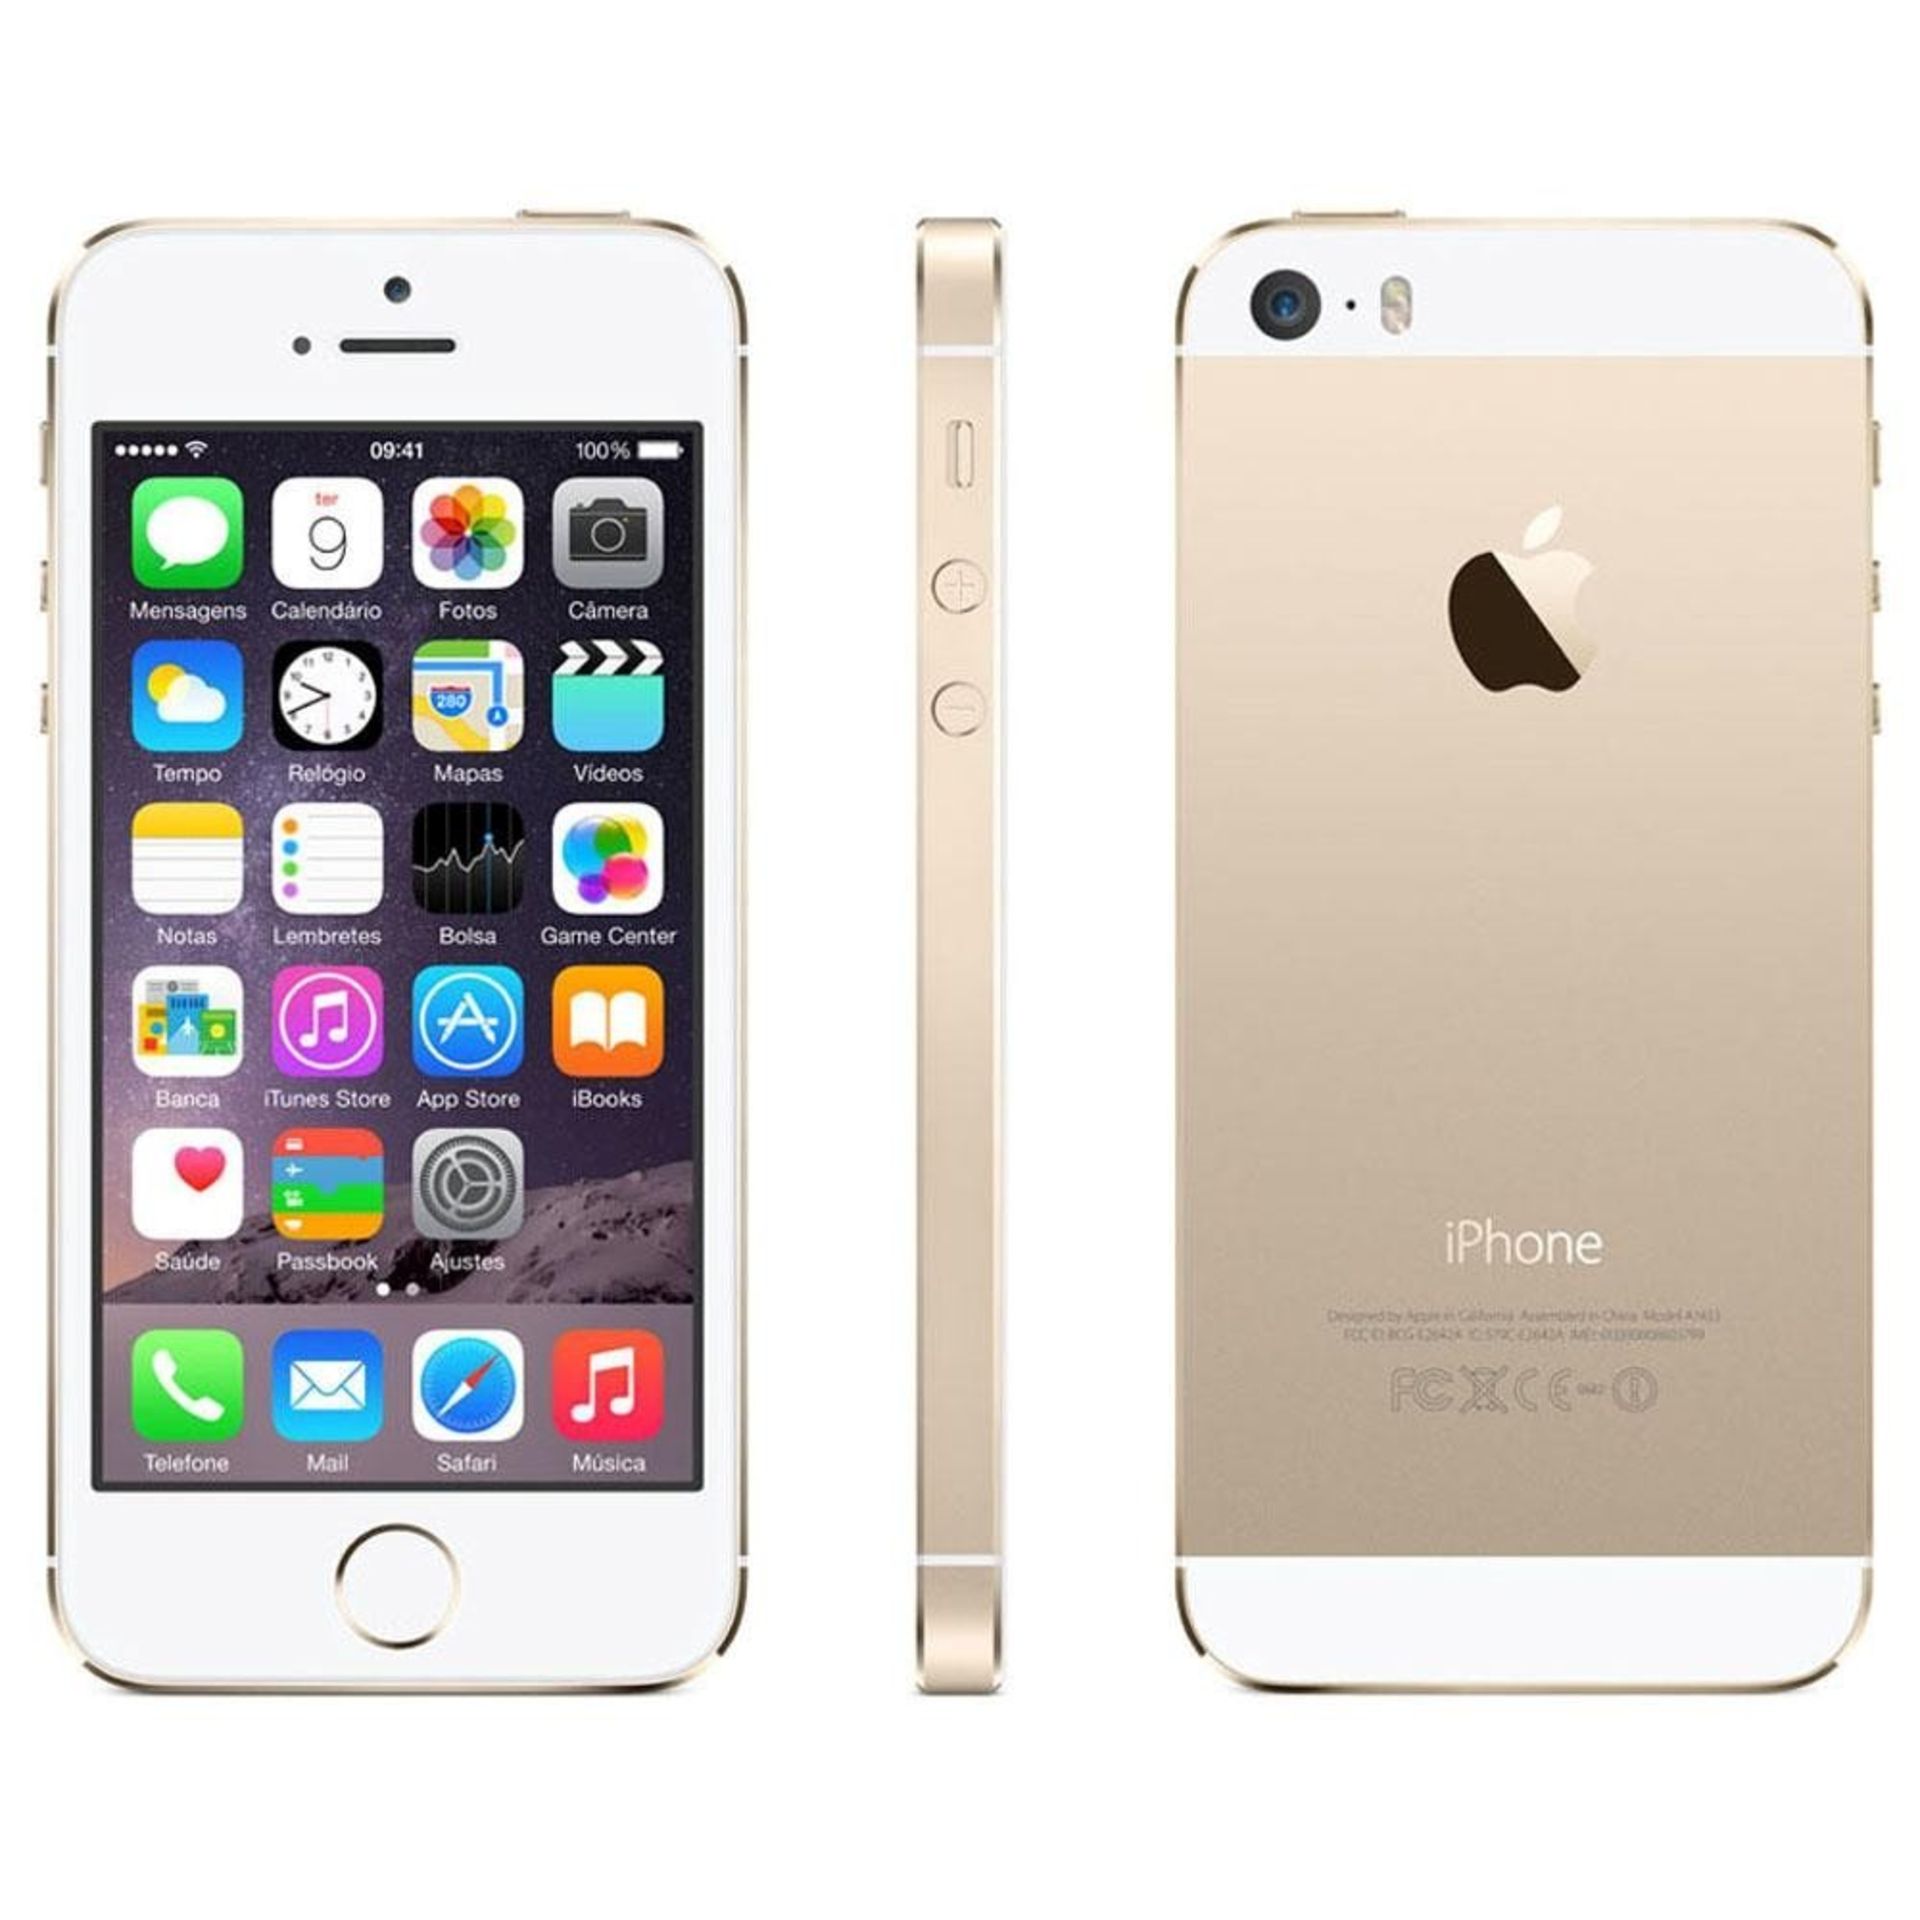 *TRADE QTY* Grade A Apple iPhone 5S Unlocked 16GB - Gold - Touch ID - Apple Box With Some